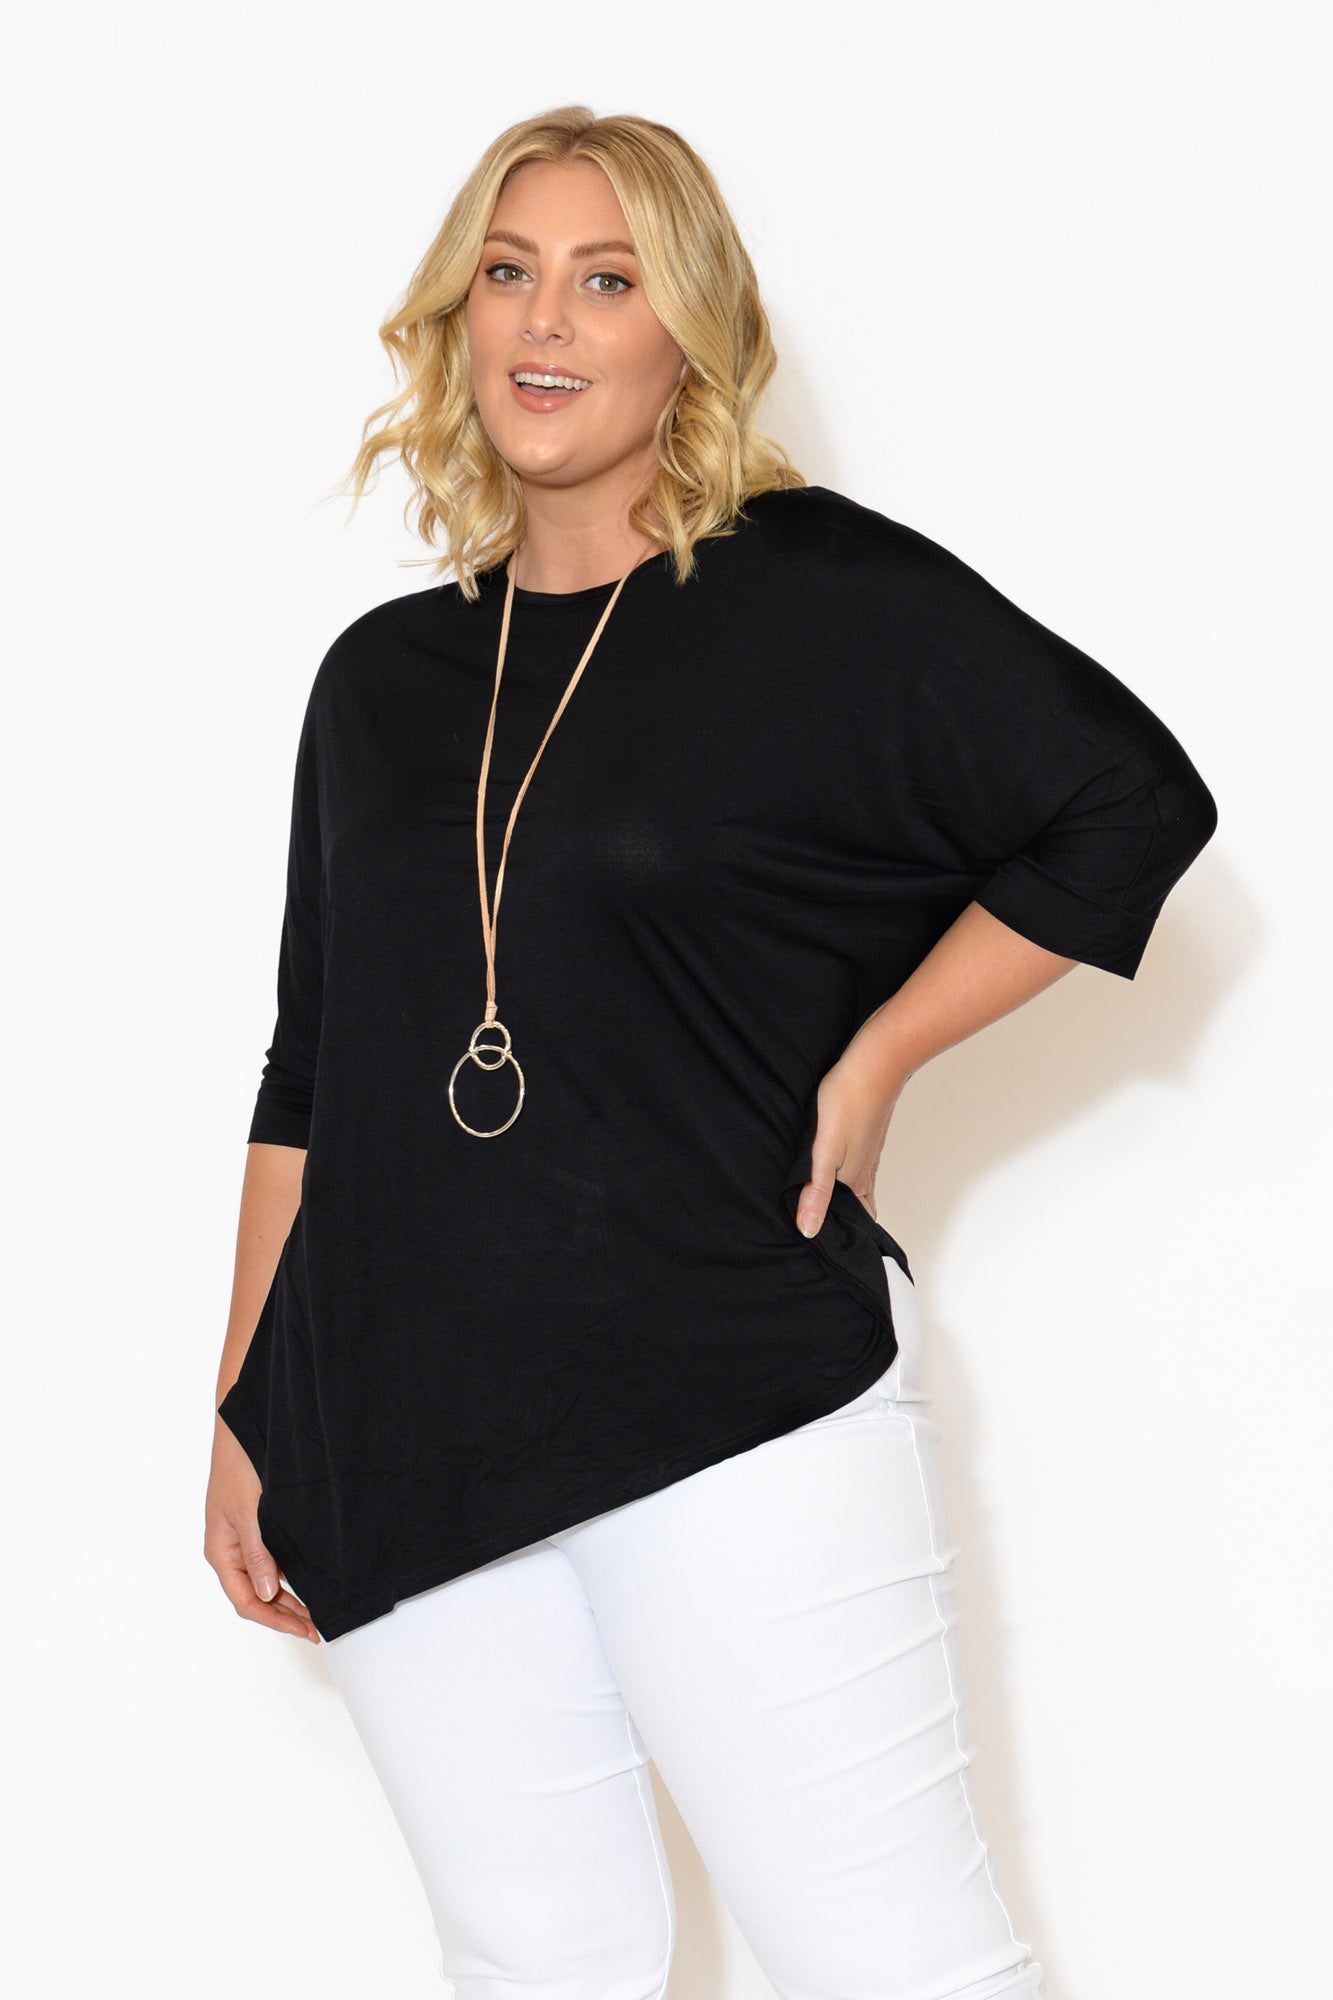 Women's Plus Size Tops - For All & Curves | Blue Bungalow